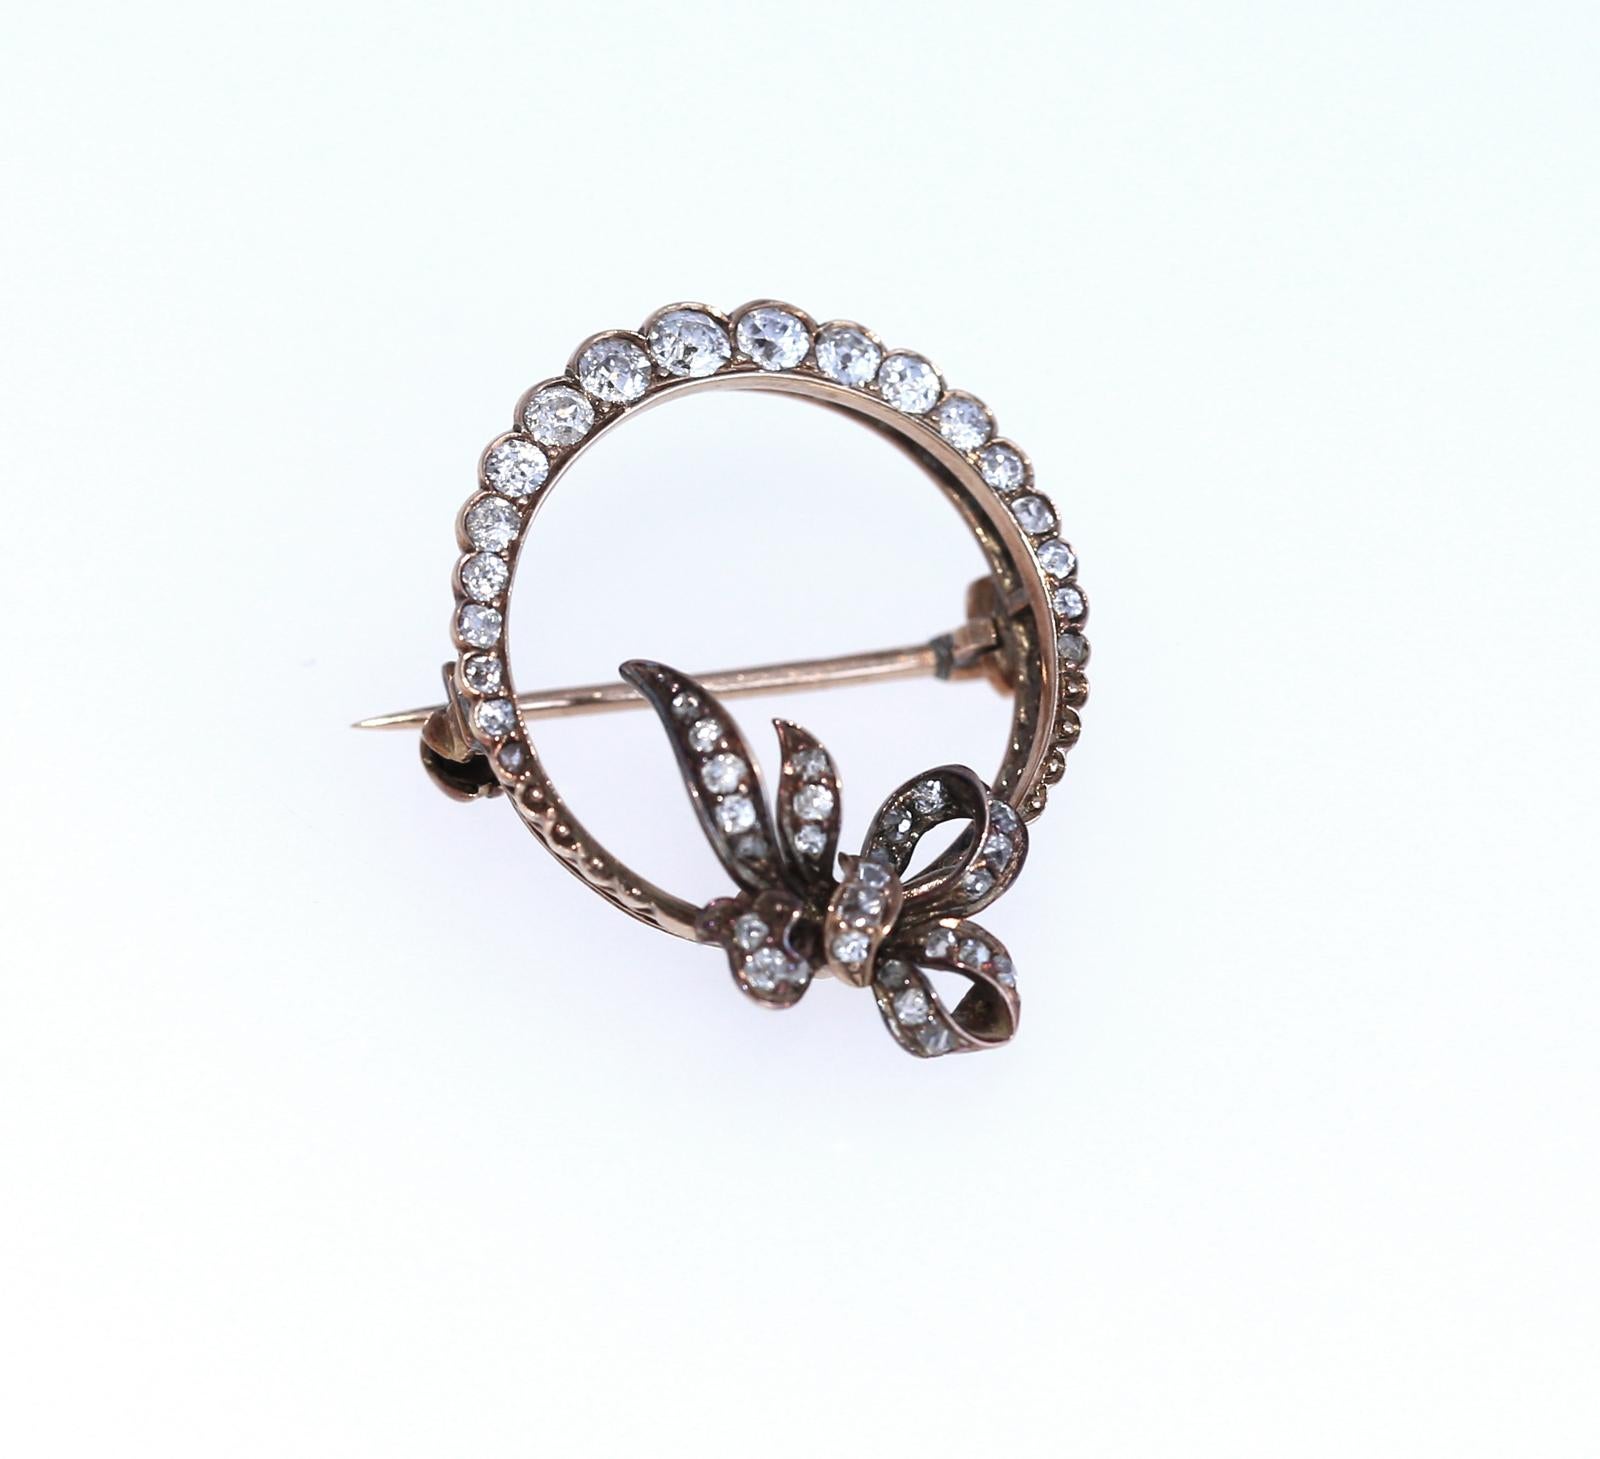 Fine Diamond brooch of Victorian era. Containing 45 Old mine and mixed cut Diamonds. Mounted in rose gold.
Pin back stamp: 585 (partially obscured mark).
The brooch measures approximately 1 1/8 inches by 7/8 inch. 18K Gold with 14K  frame and pin